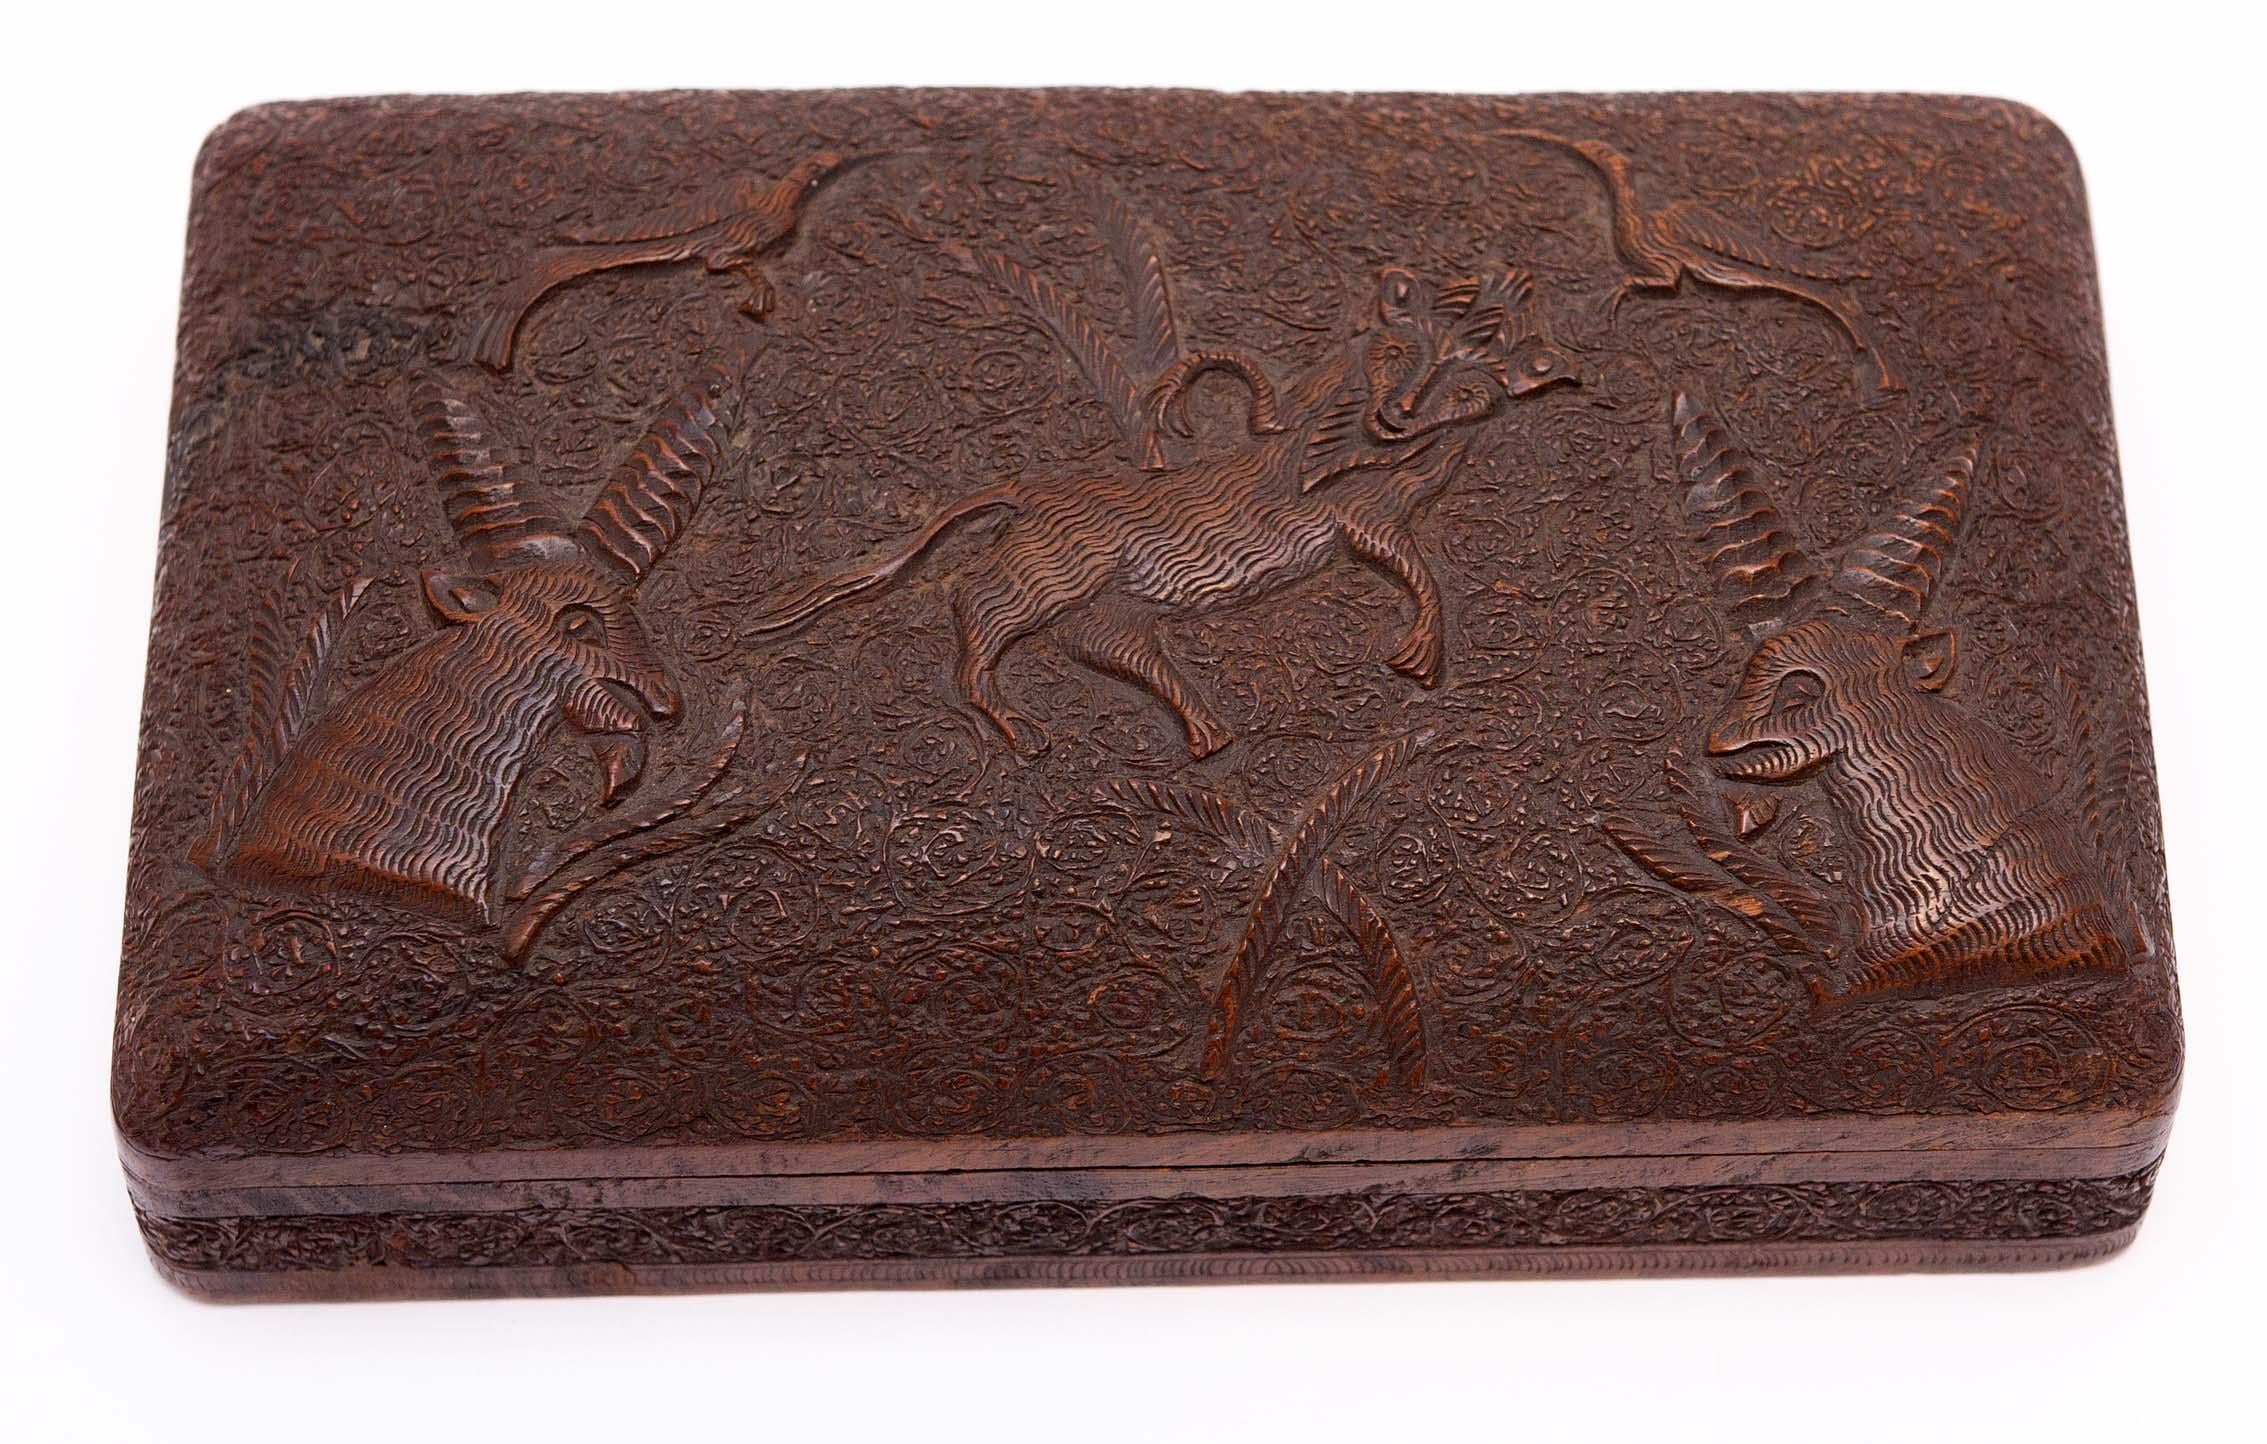 Finely carved Persian hinged box. Decorated with fantasy animals. Circa 1900. Carved hardwood.